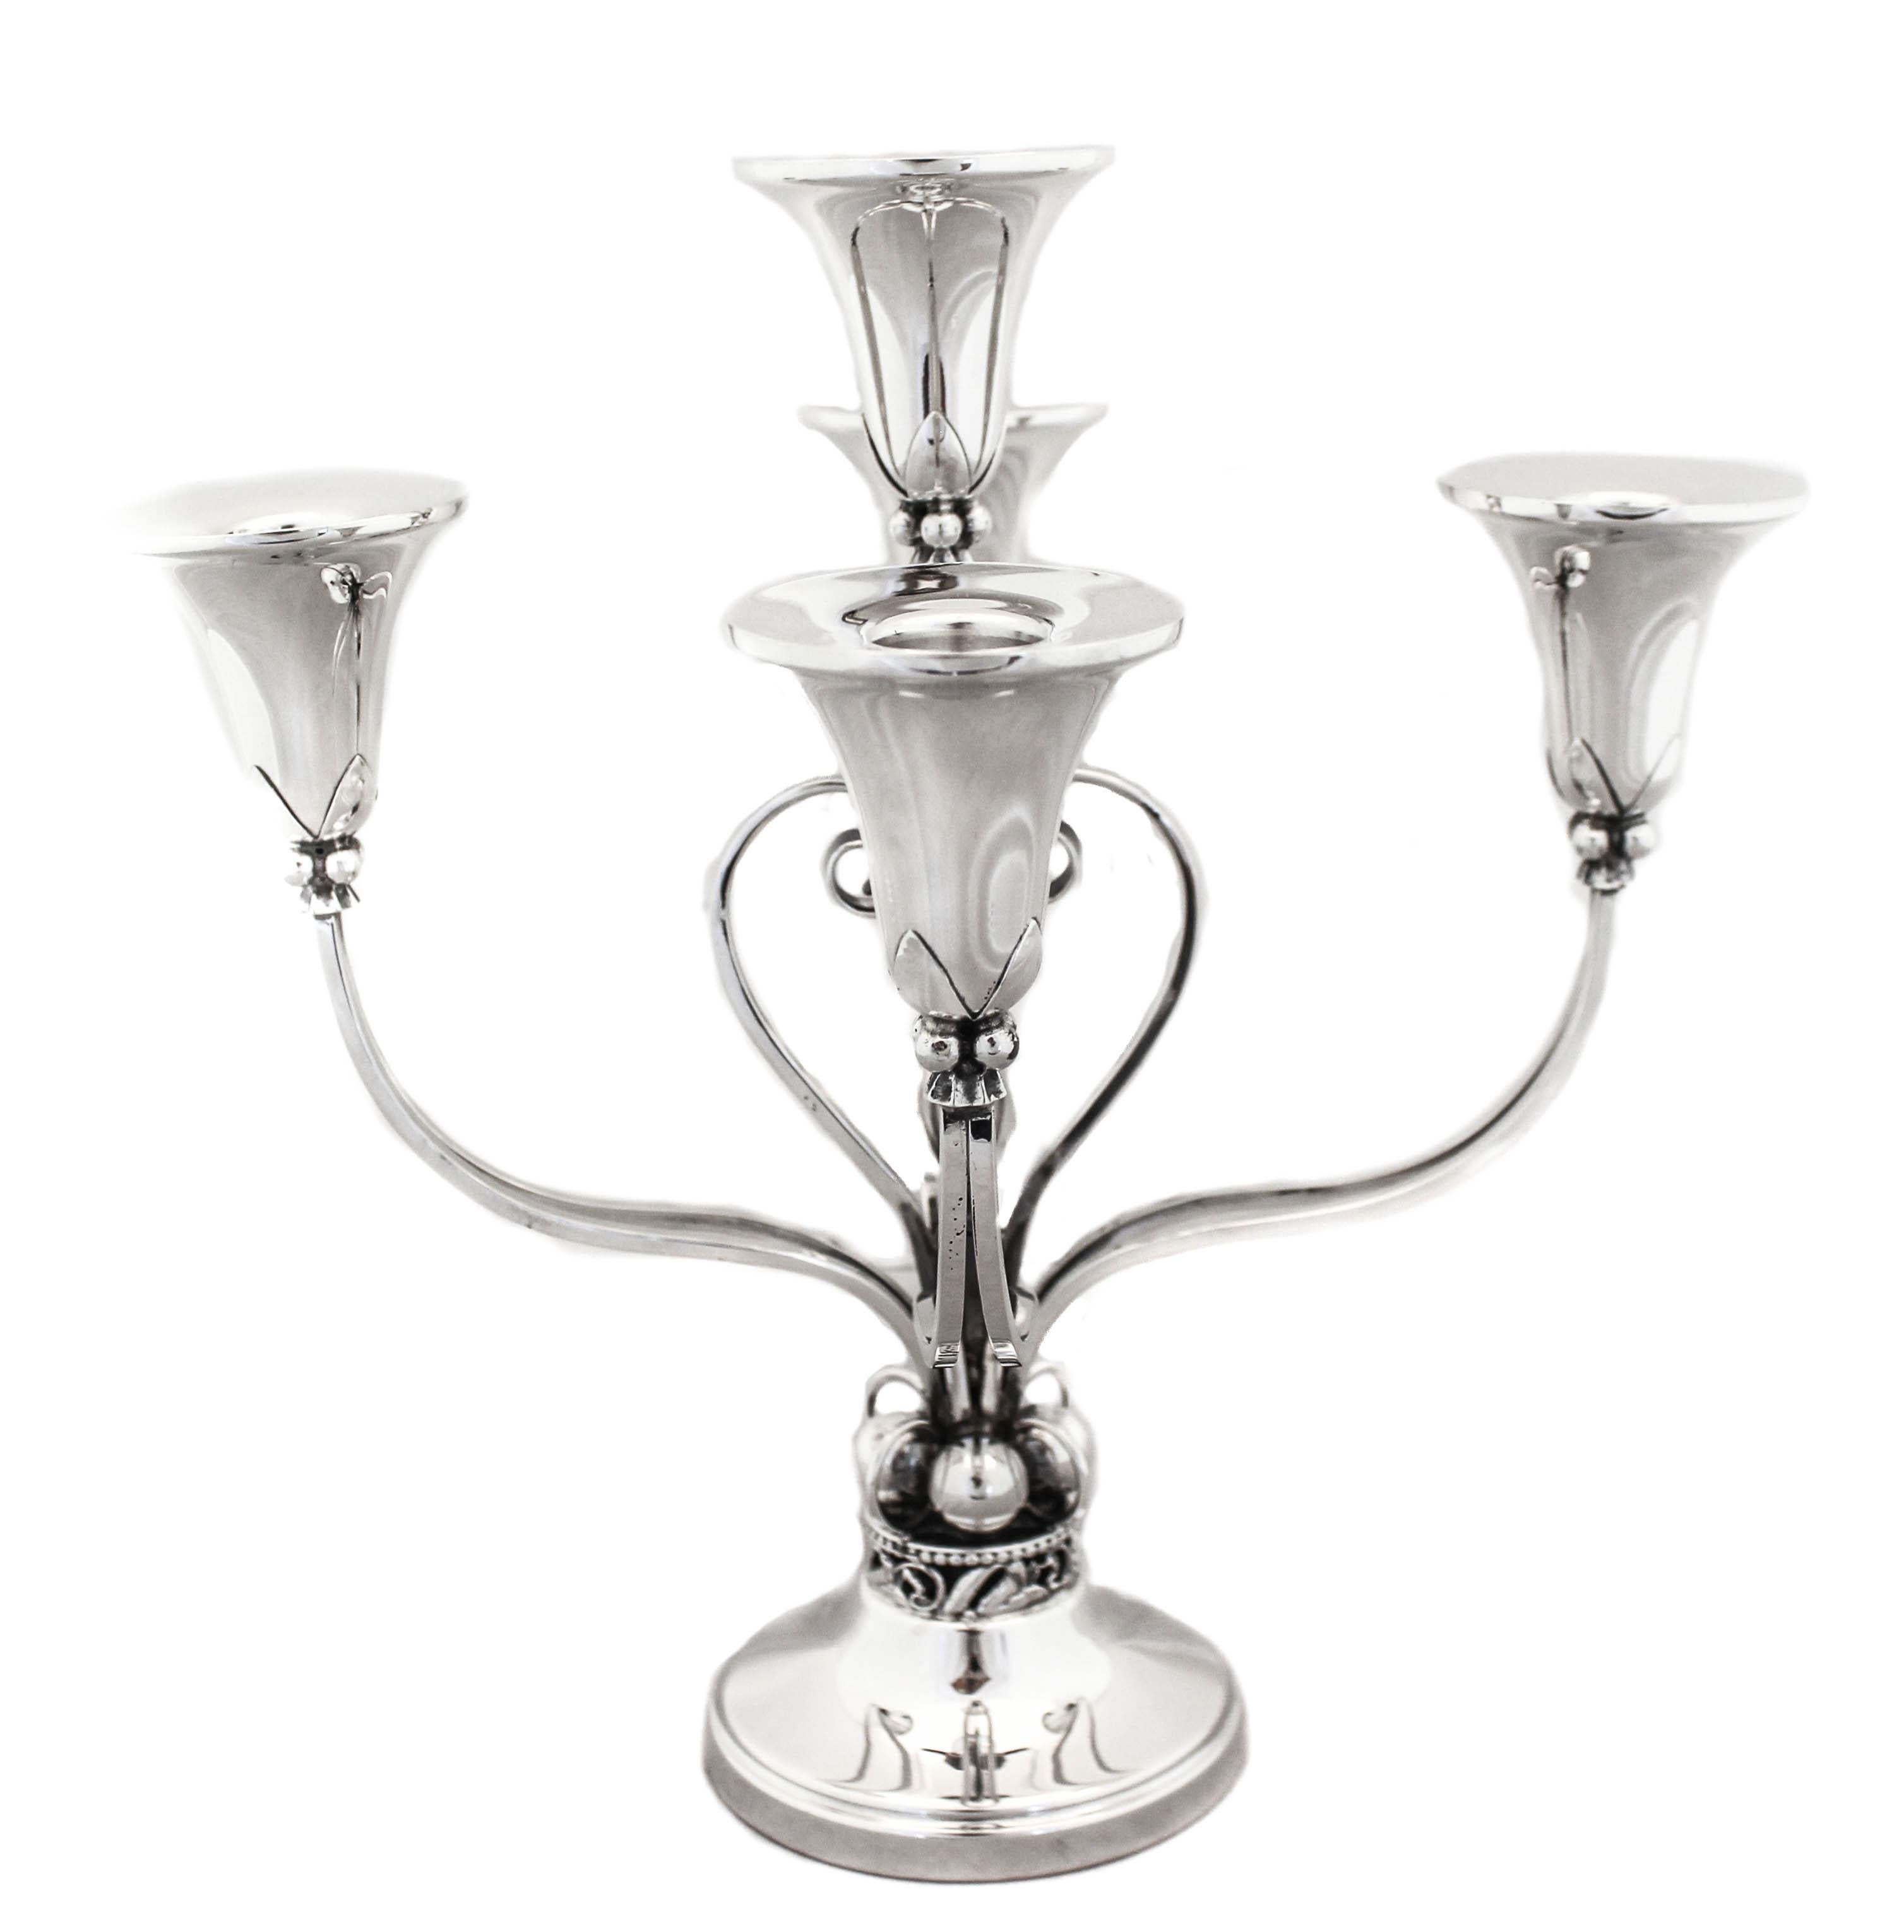 A magnificent five-branch sterling silver candelabra with a Jensenesque Art Deco style. It has a great shape and design and really stands-out.